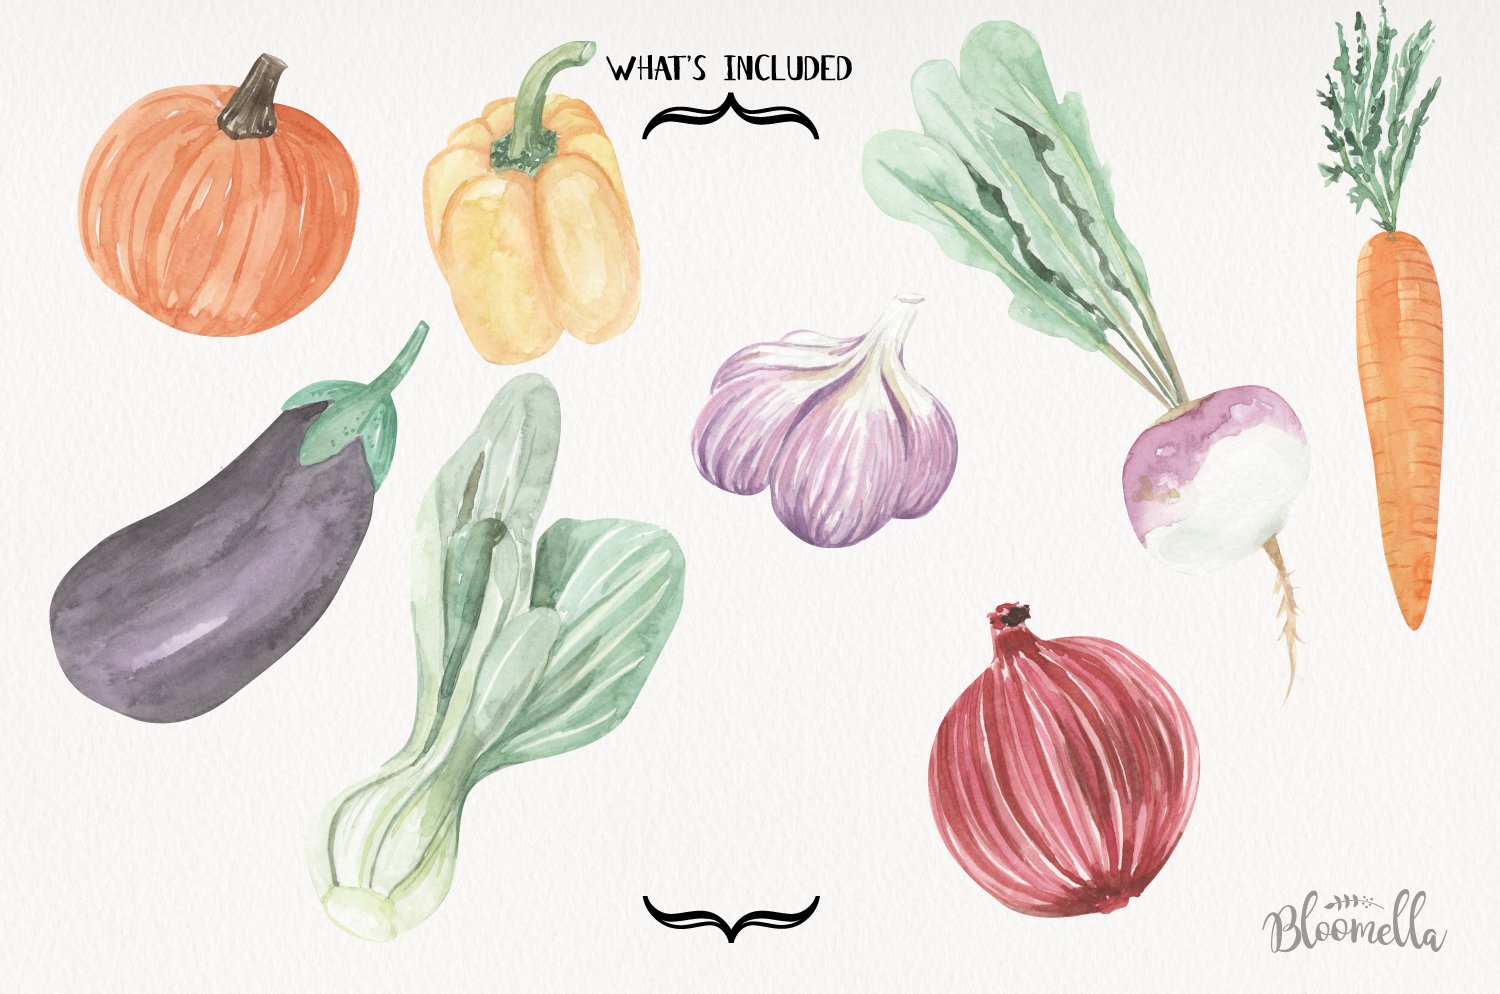 High quality vegetable illustrations.